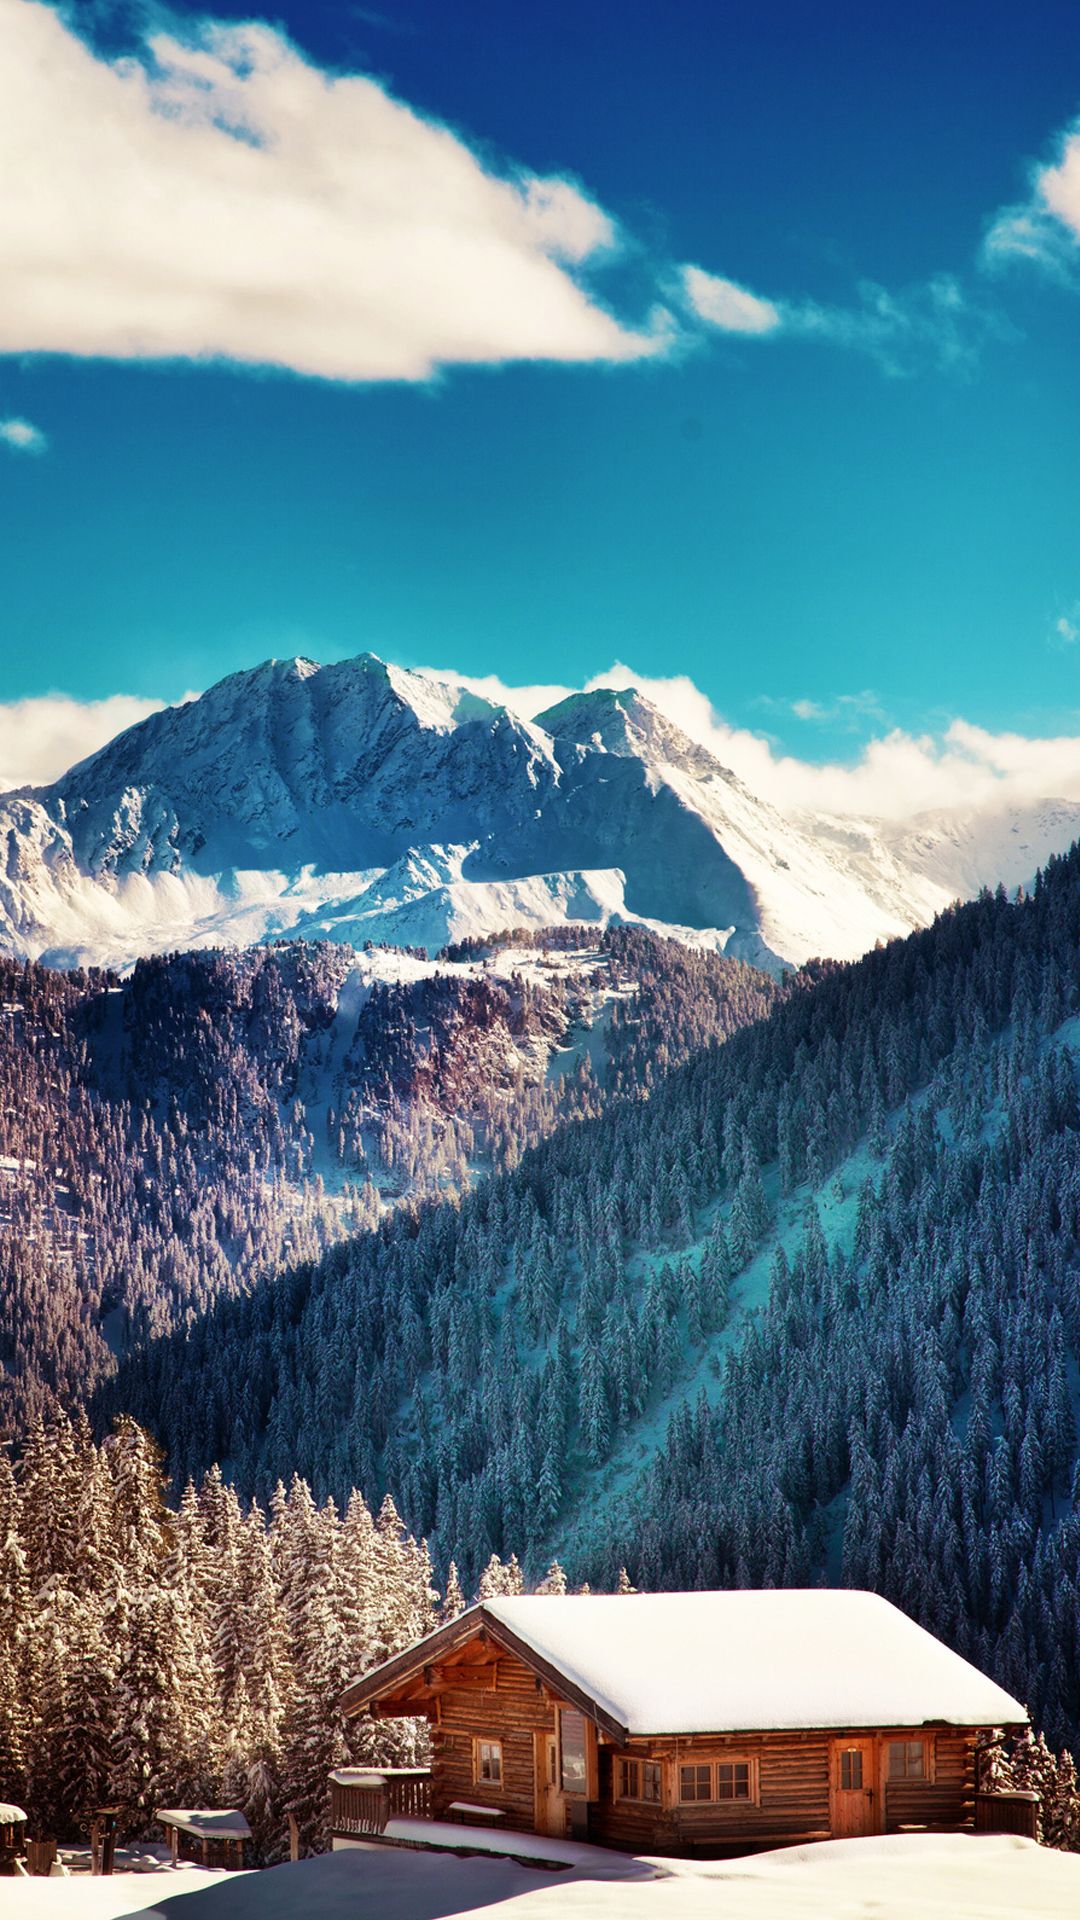 Mountains Chalet Blue Sky Android Wallpaper free download